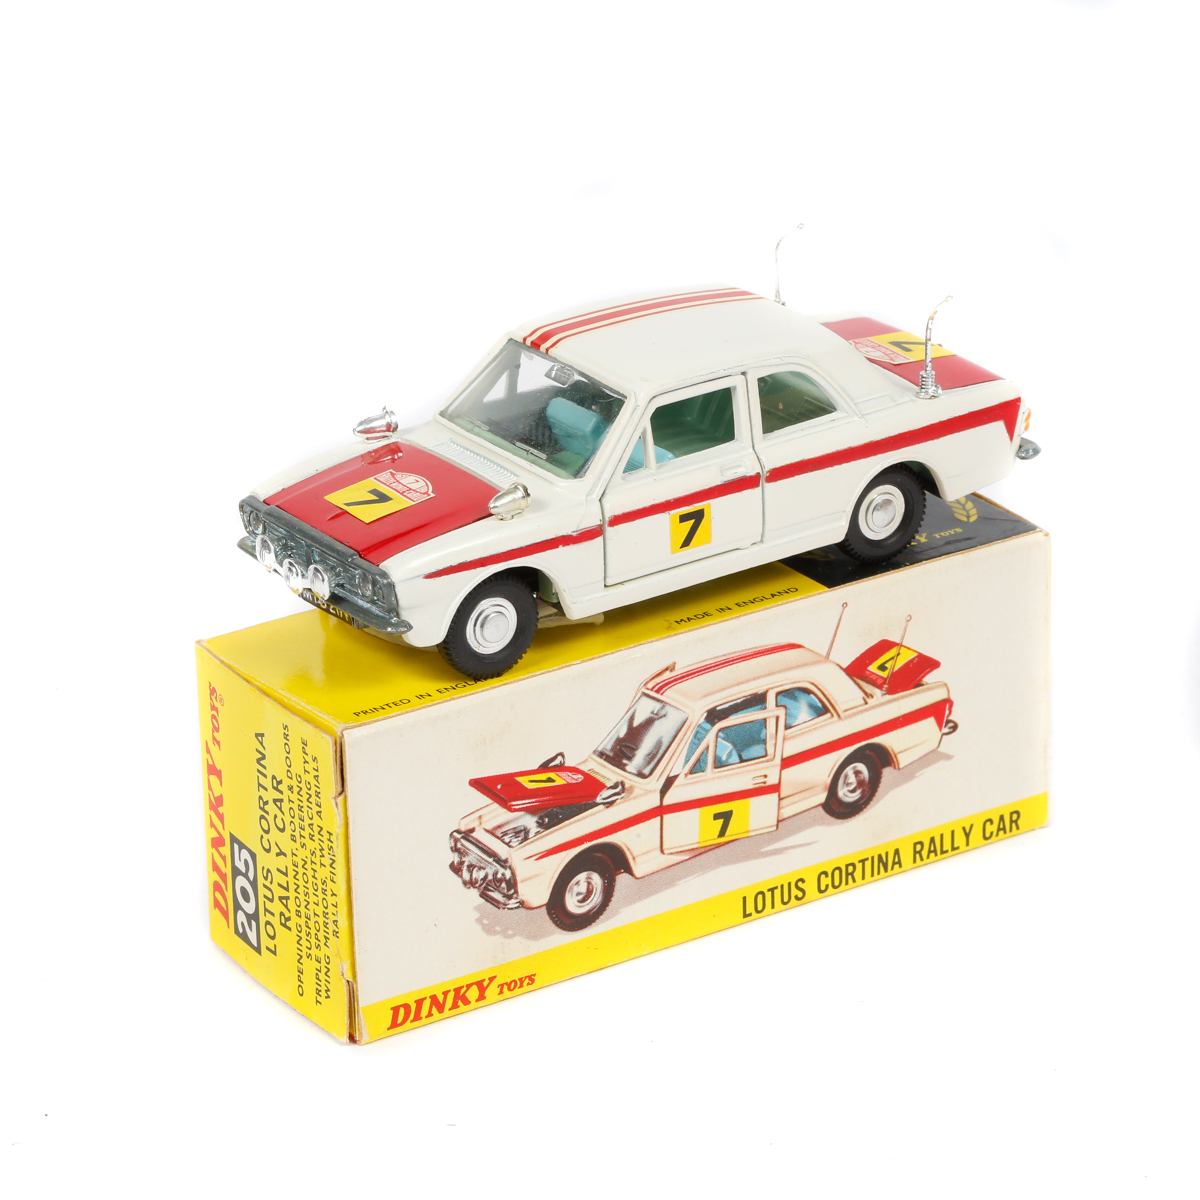 Dinky Toys Lotus Cortina Rally Car (205). A Mk.2 Cortina in white with red bonnet and boot, red